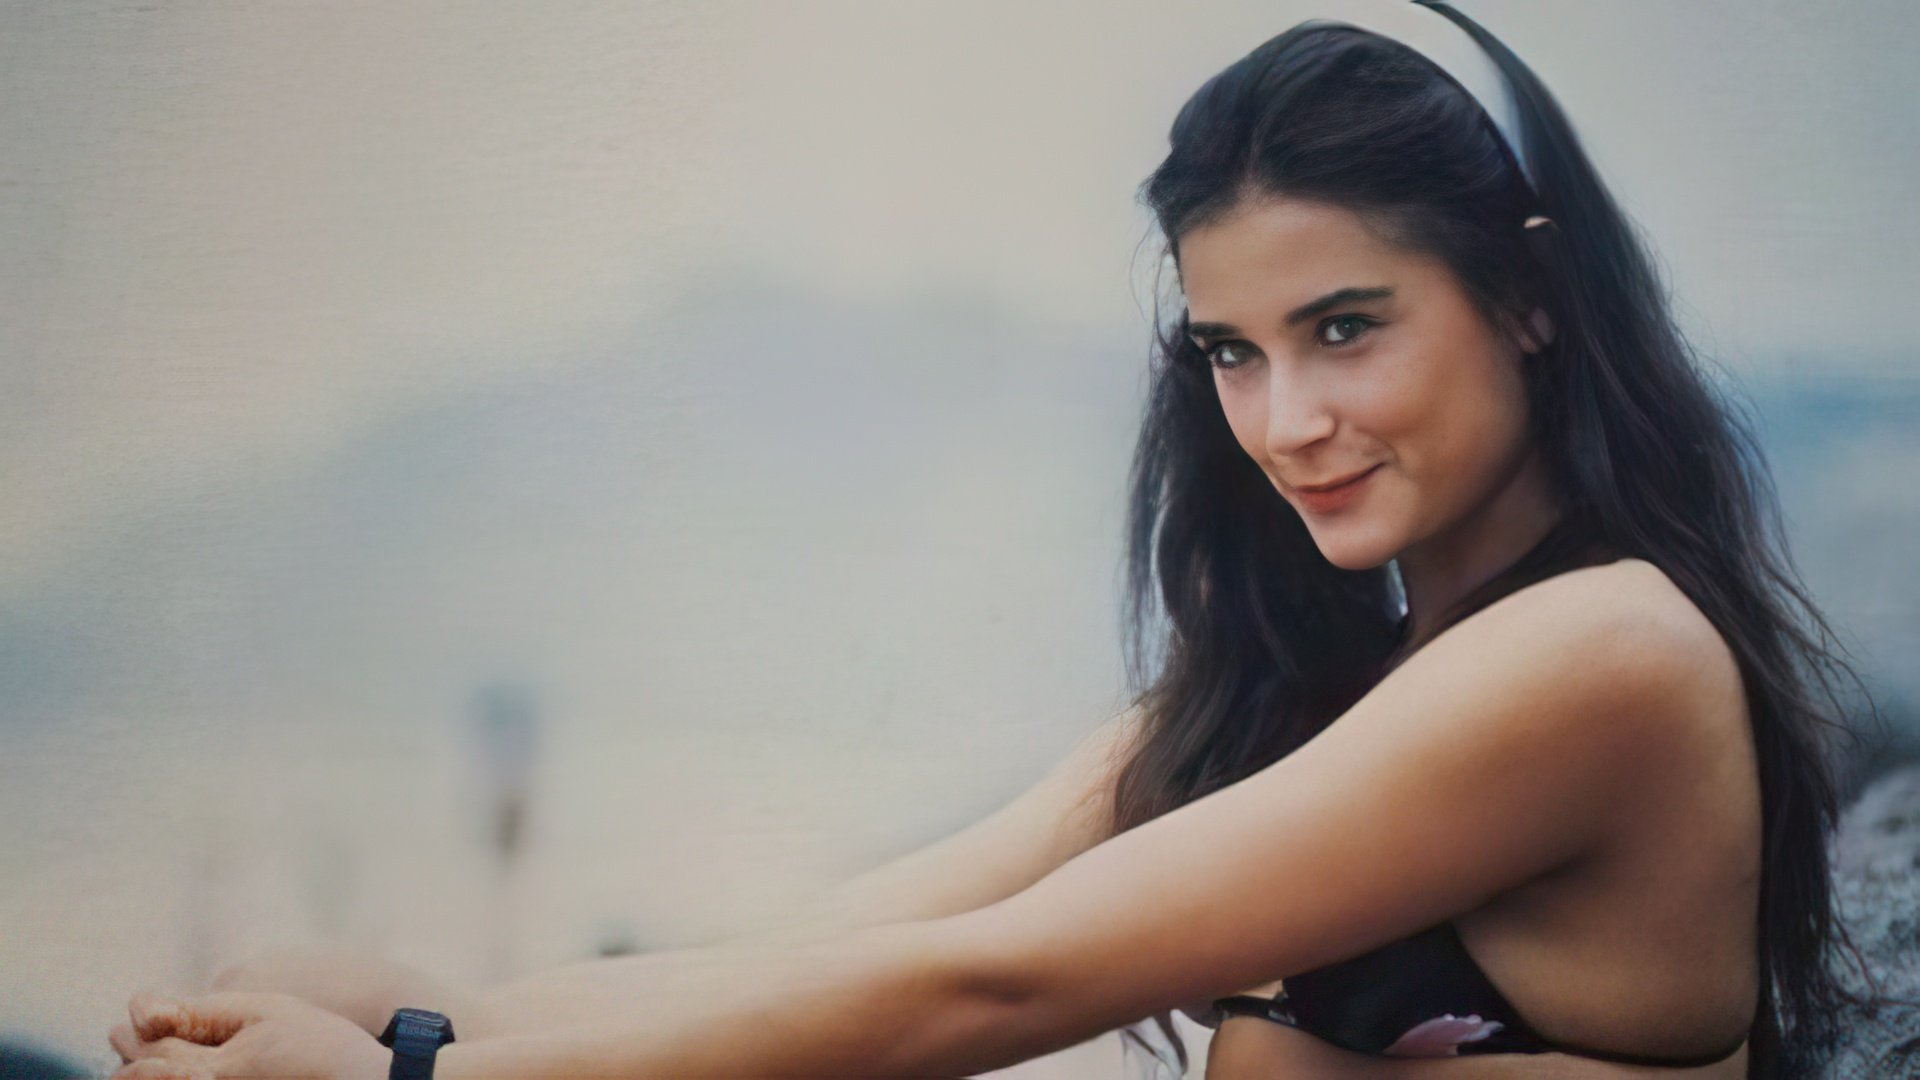 At the age of 17 Demi Moore decided to enroll in drama classes